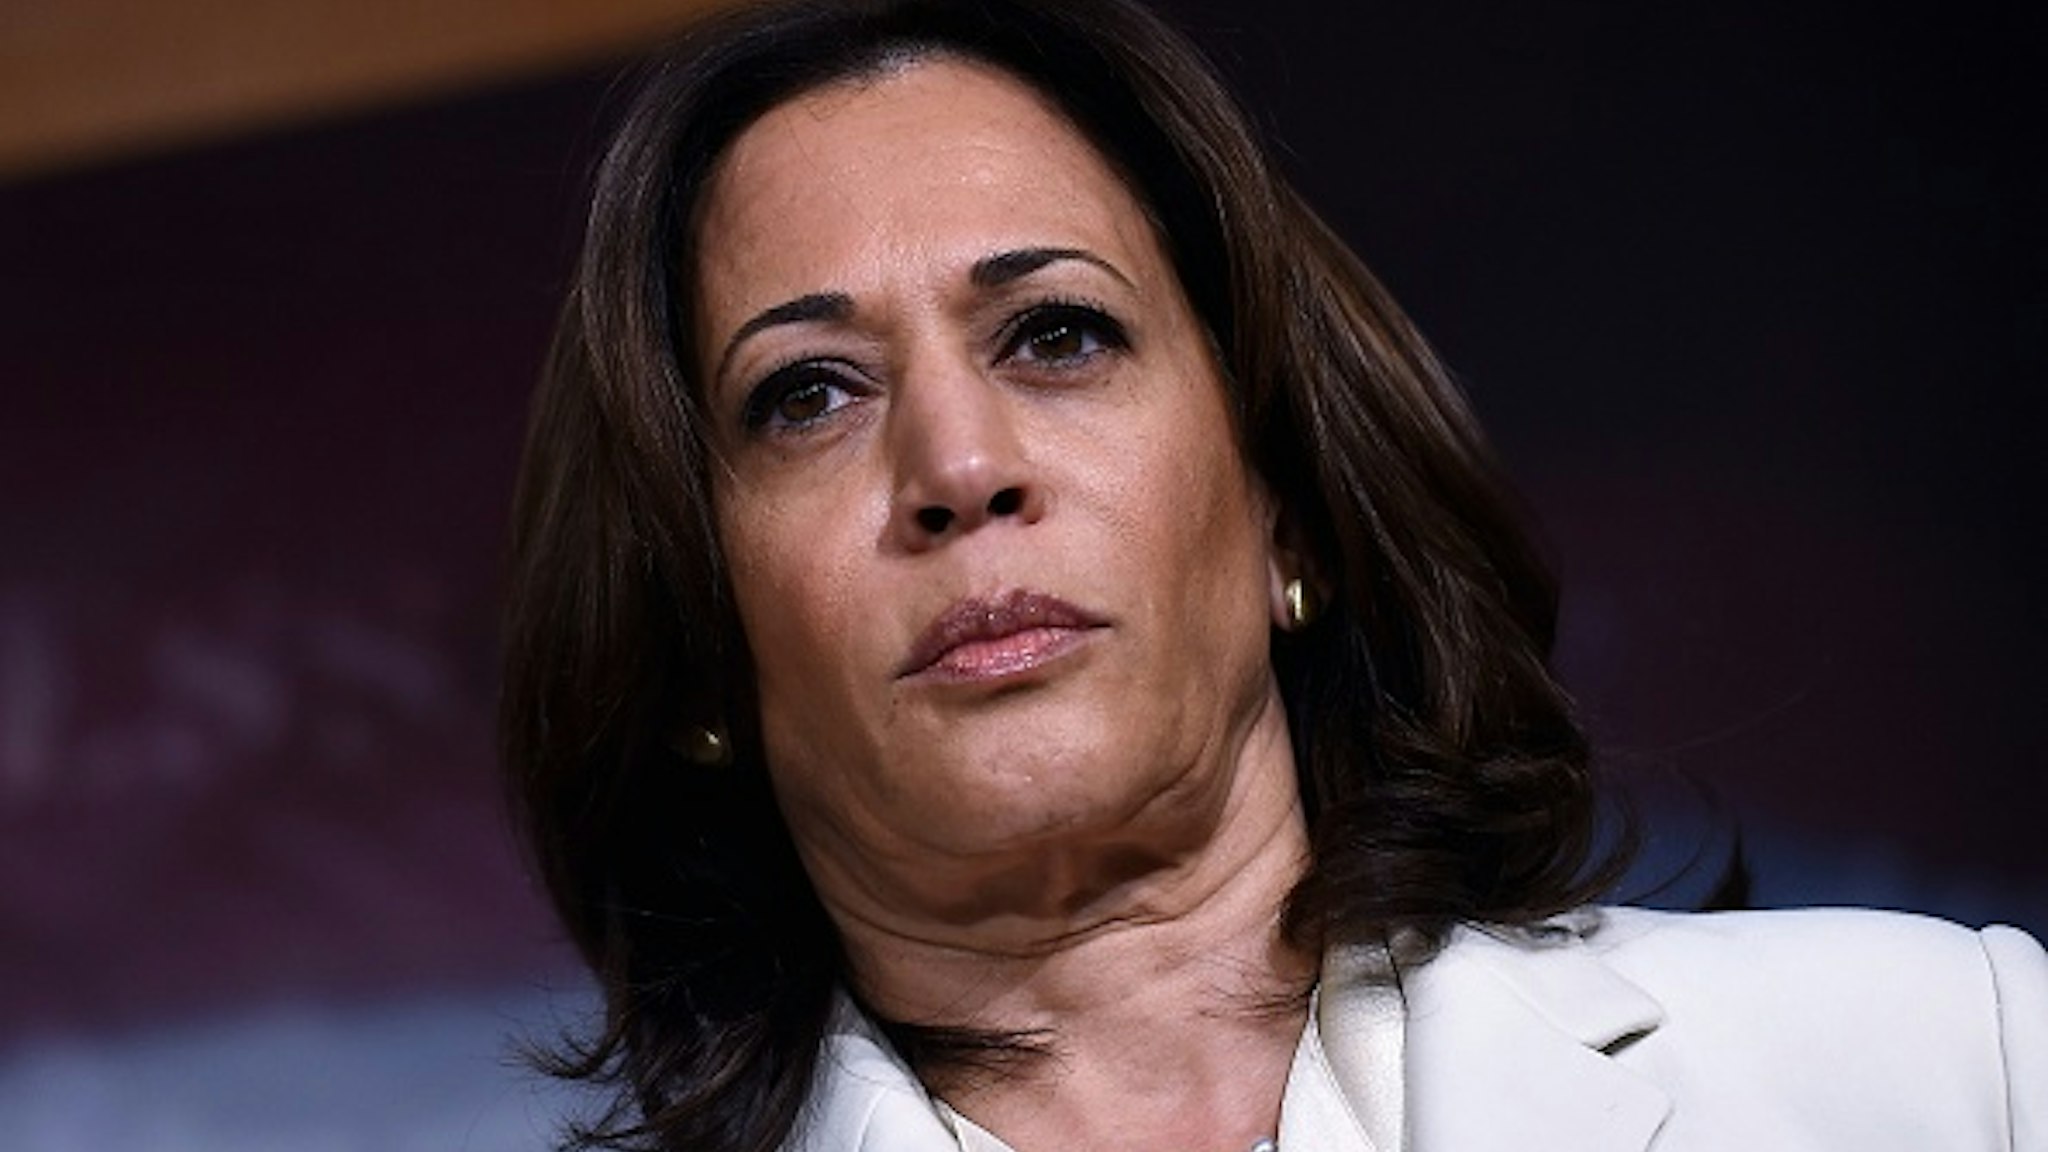 Senator Kamala Harris (D-CA) speaks about the the Senate Impeachment trial at the US Capitol, January 16, 2020, in Washington, DC. - Members of the US Senate were sworn in on January 16 to serve as jurors at the historic impeachment trial of President Donald Trump.